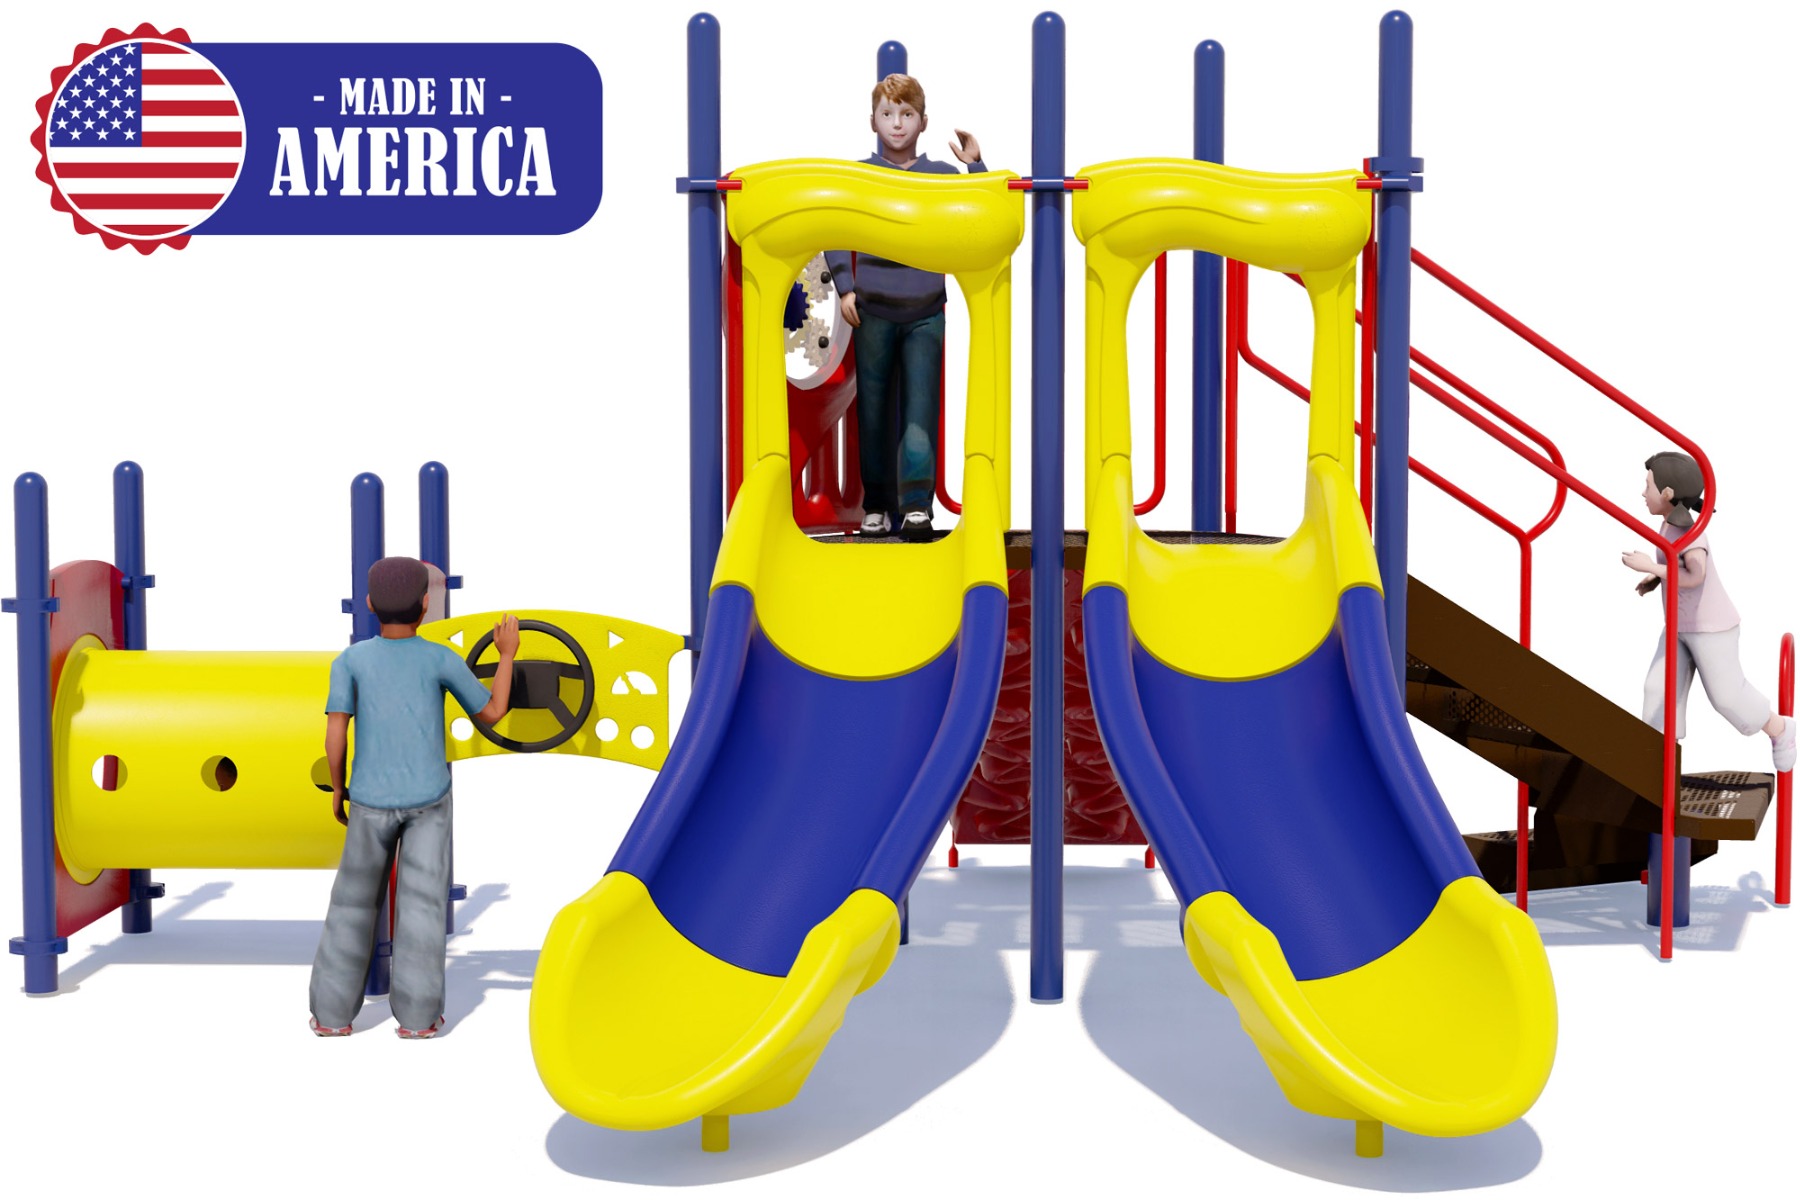 Double Dash Value Boss - Made in USA Playgrounds - Front View